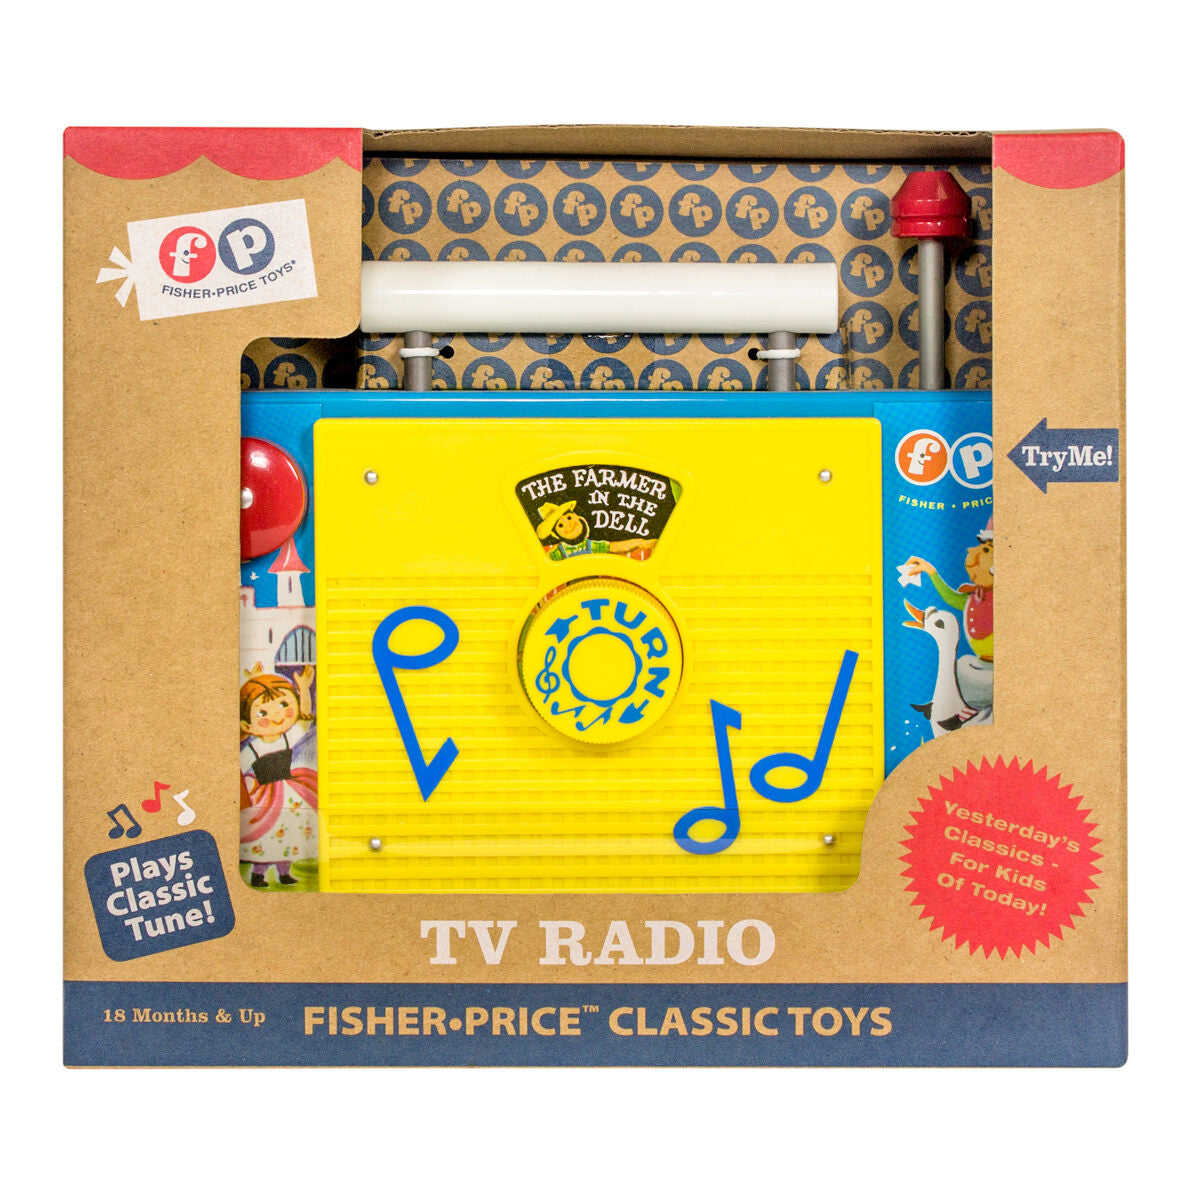 Toys　TV　Classic　—　Booghe　Fisher-Price　Radio